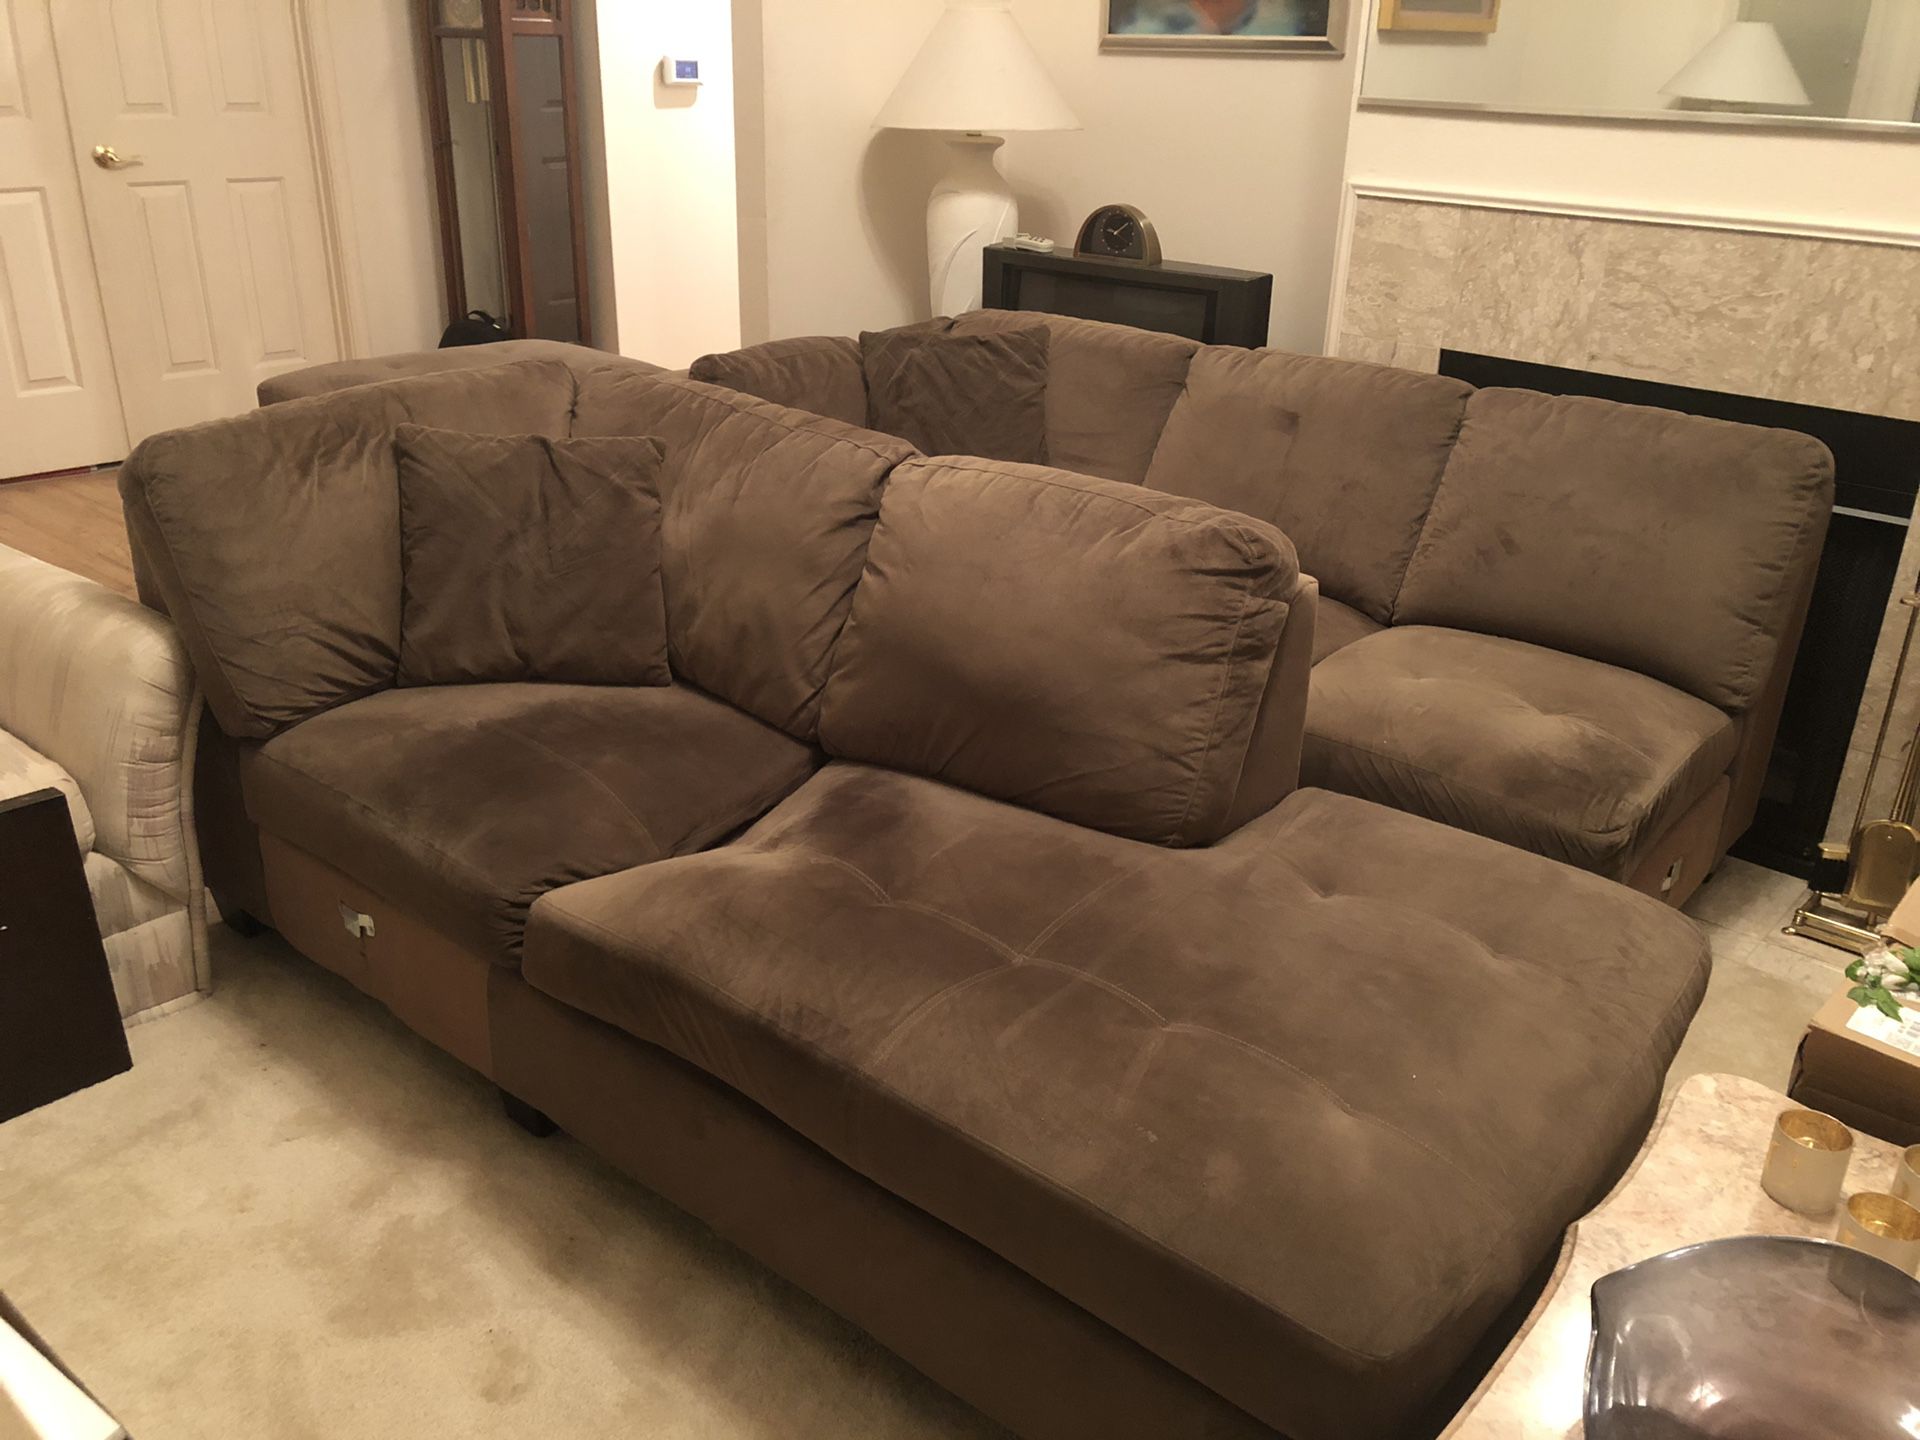 Couch and ottoman set